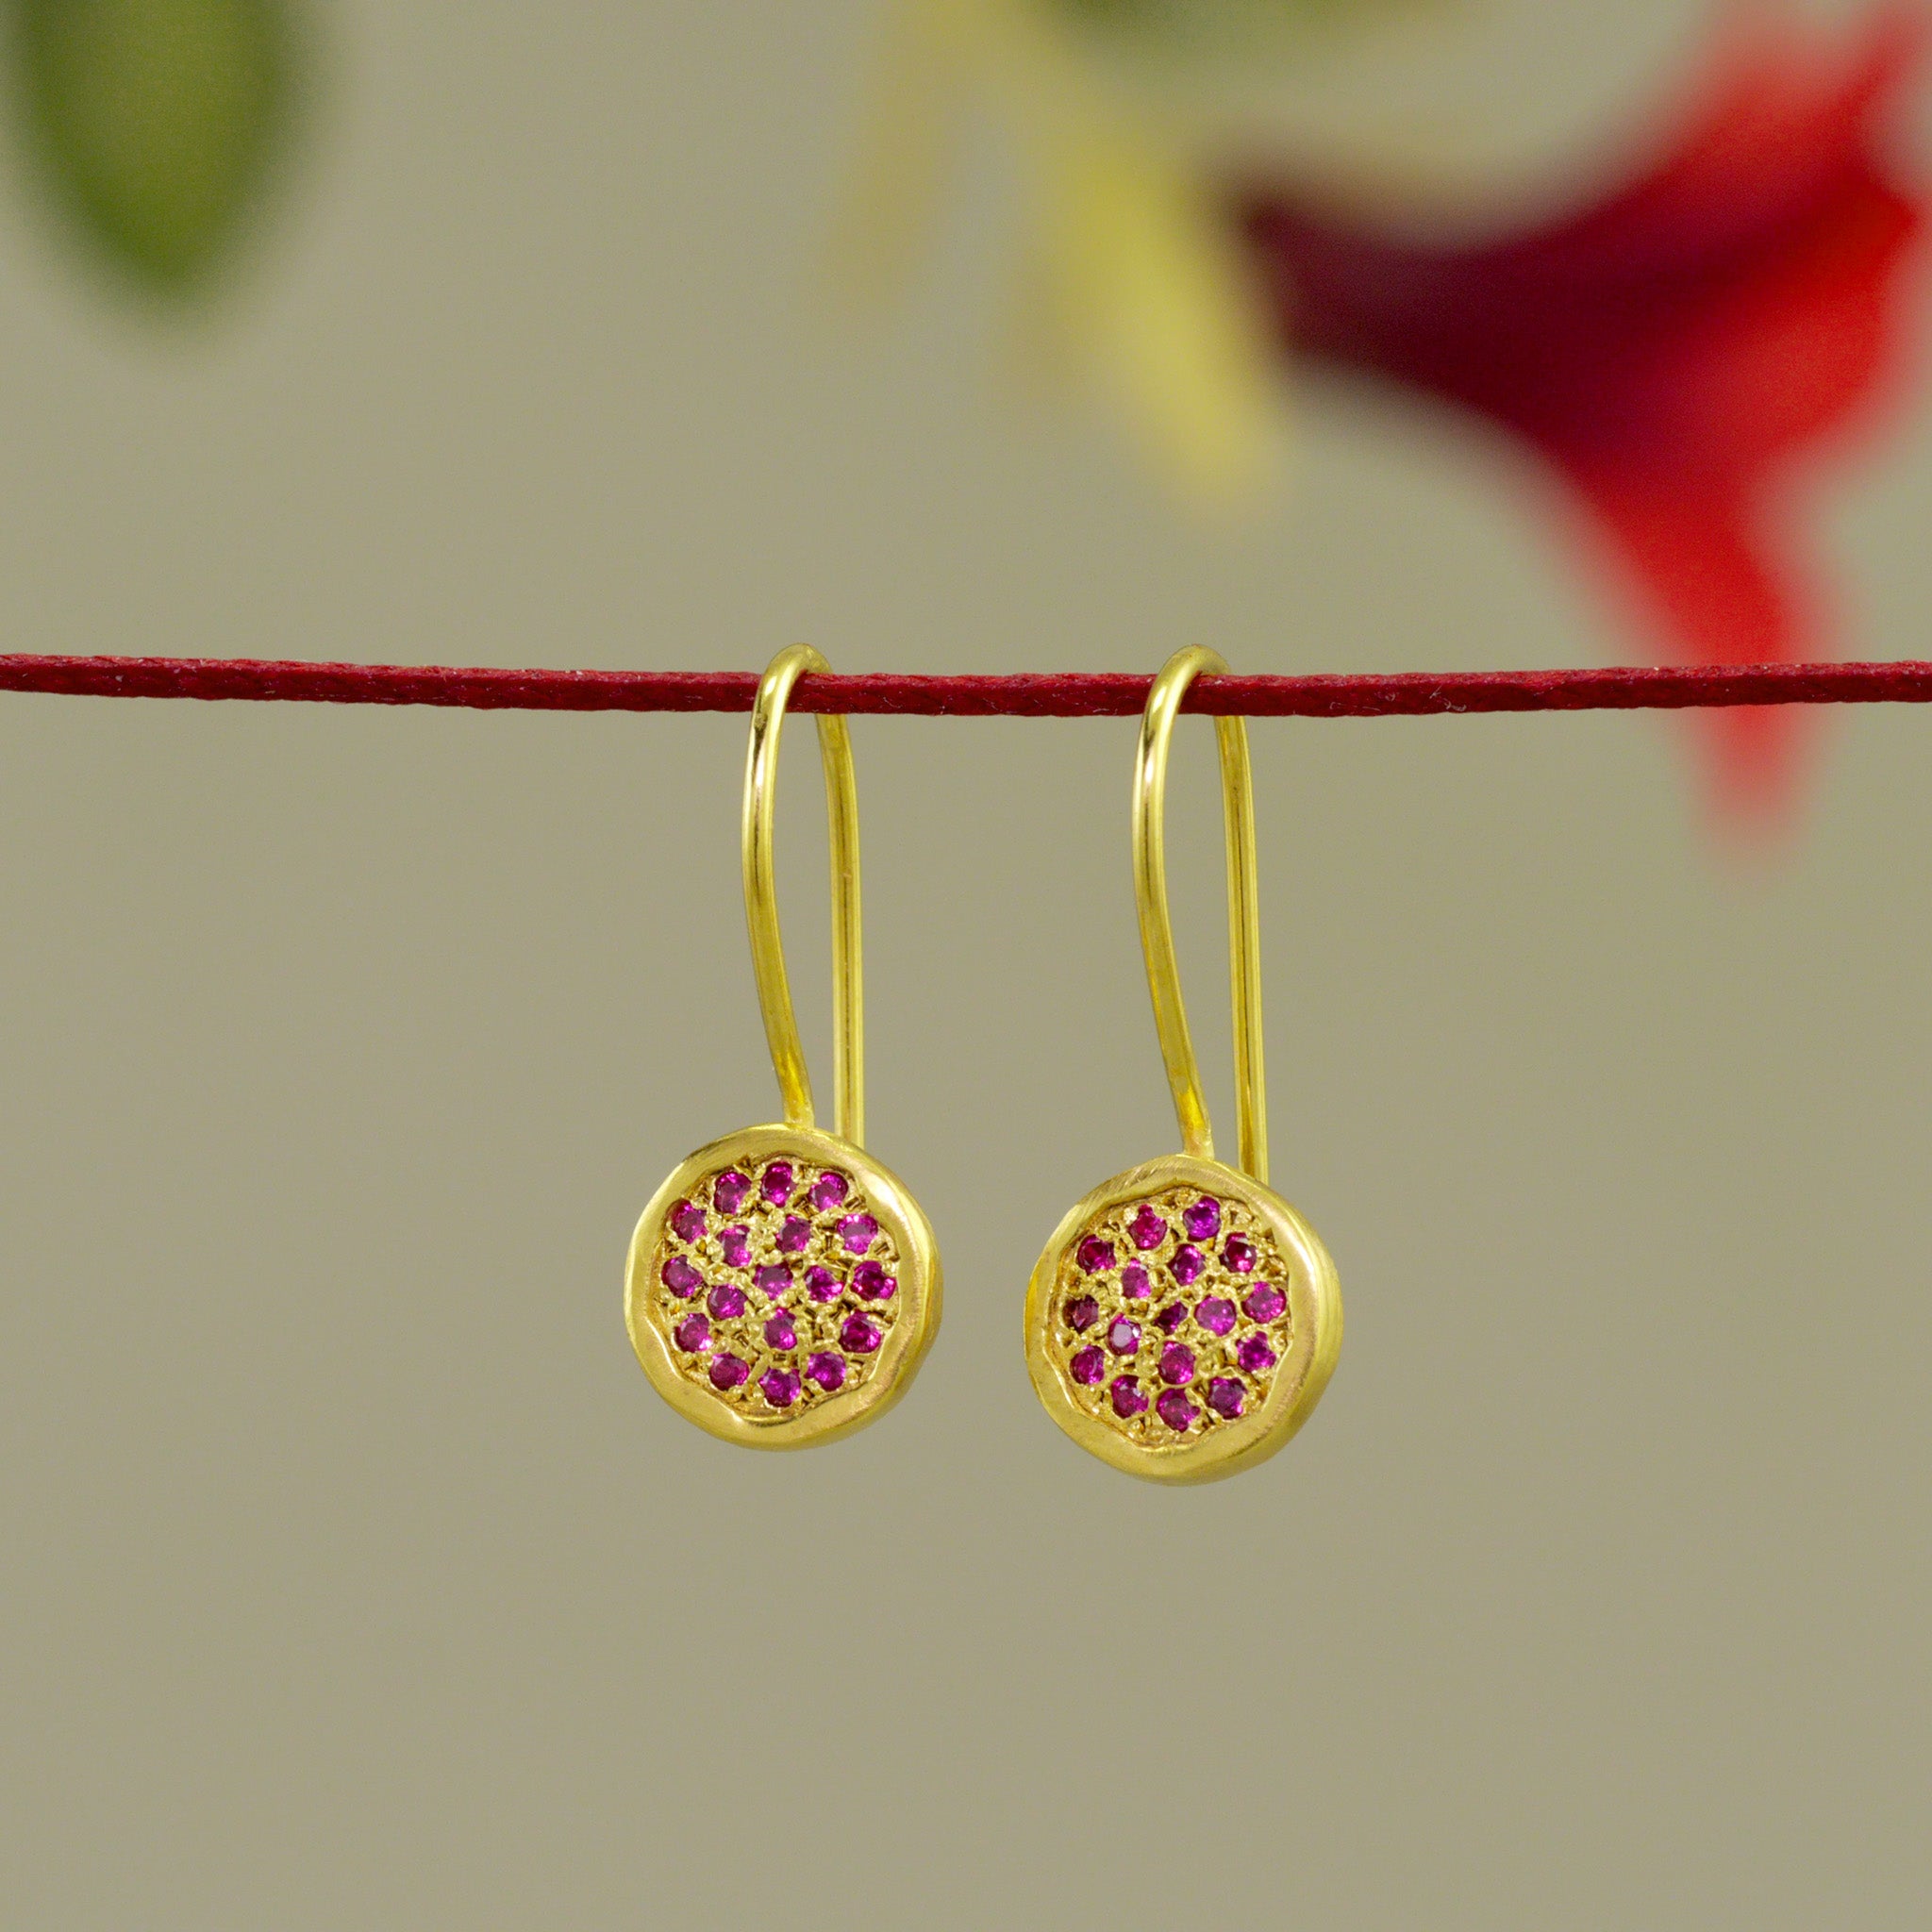 Close up of 18k Gold drop earrings adorned with twinkling ruby gemstones hanging from a red thread and red flower in the background.